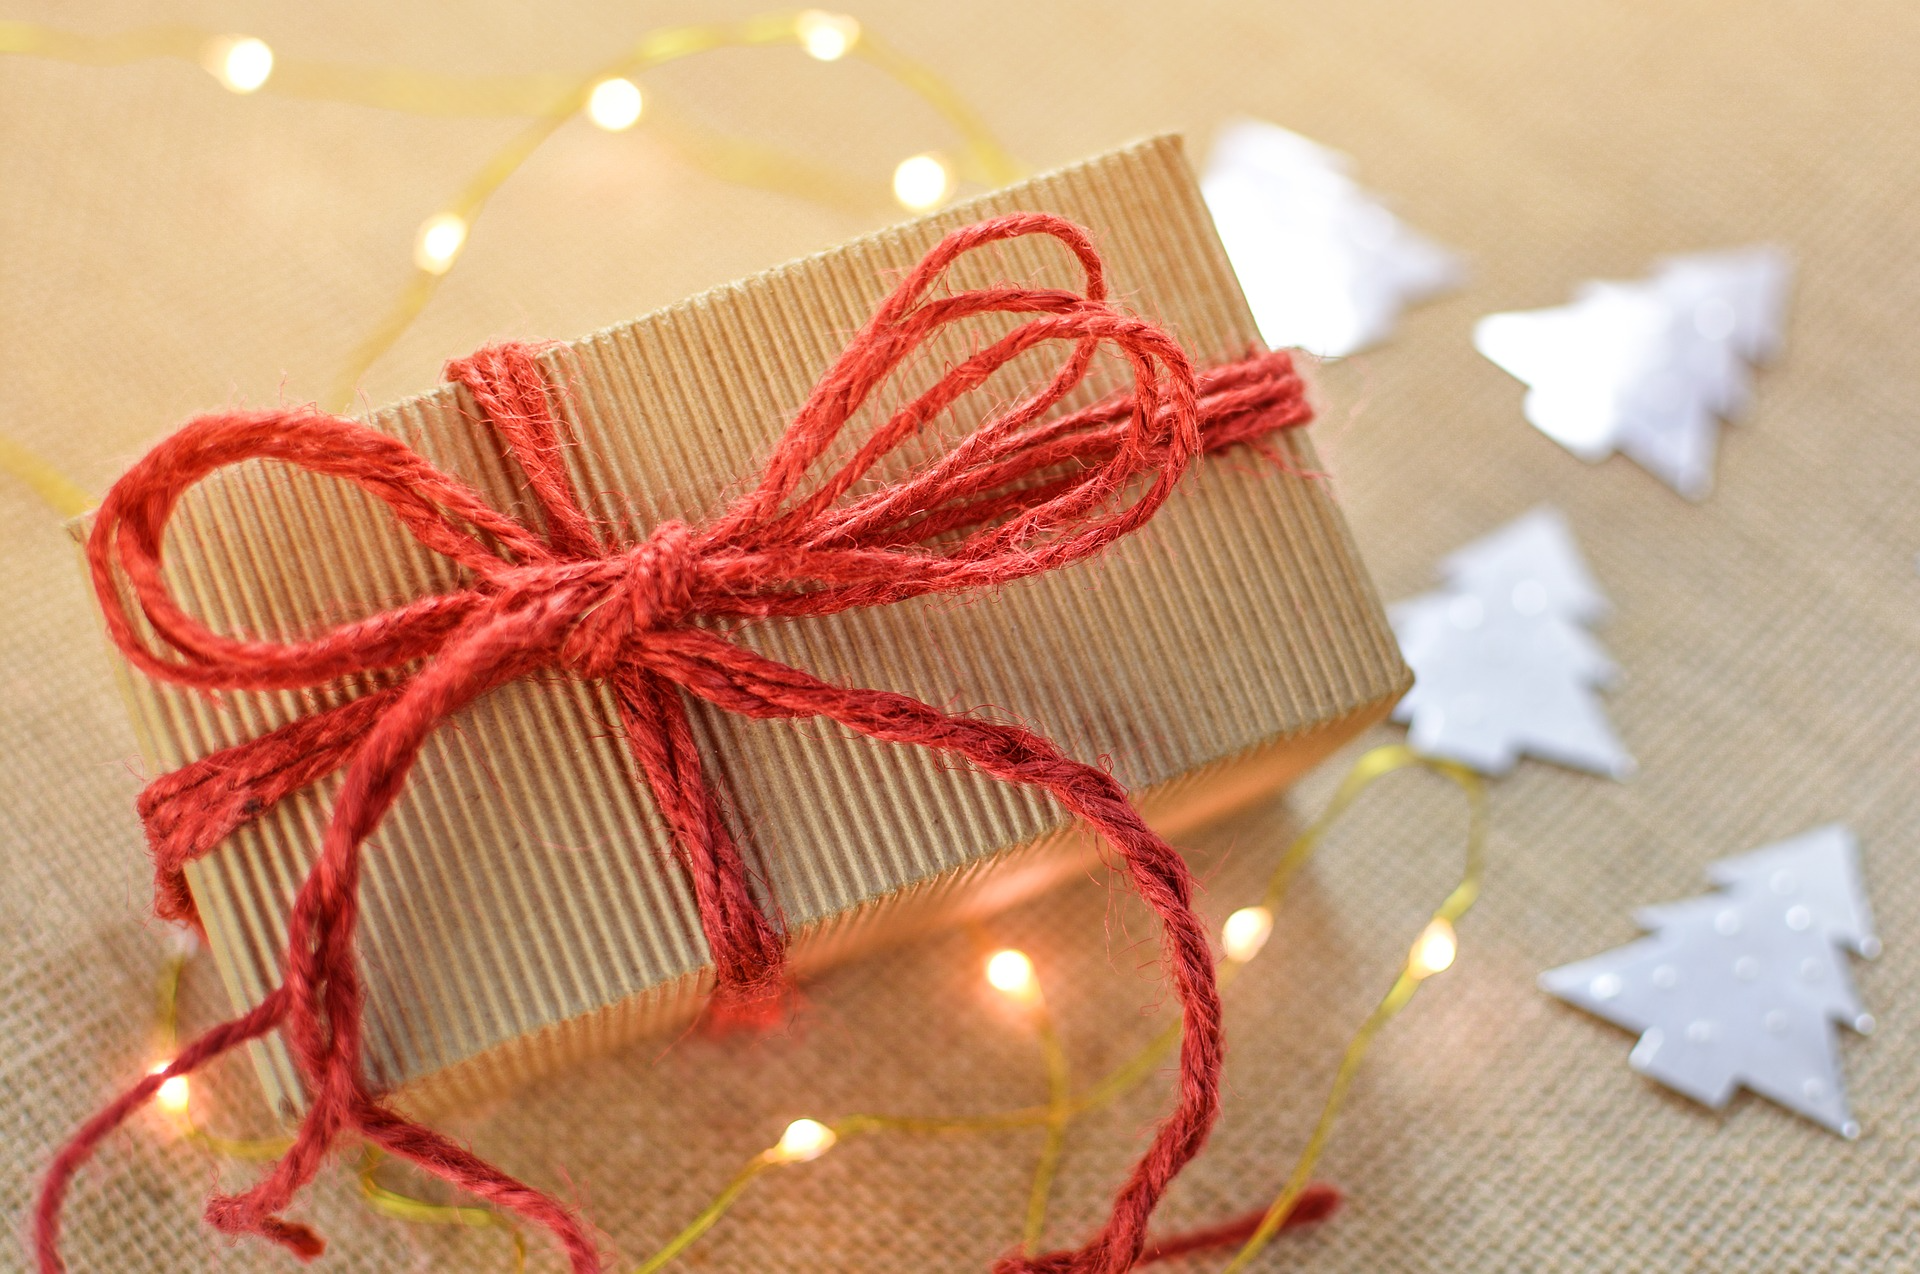 The Best Promotional Holiday Gifts for Your Clients